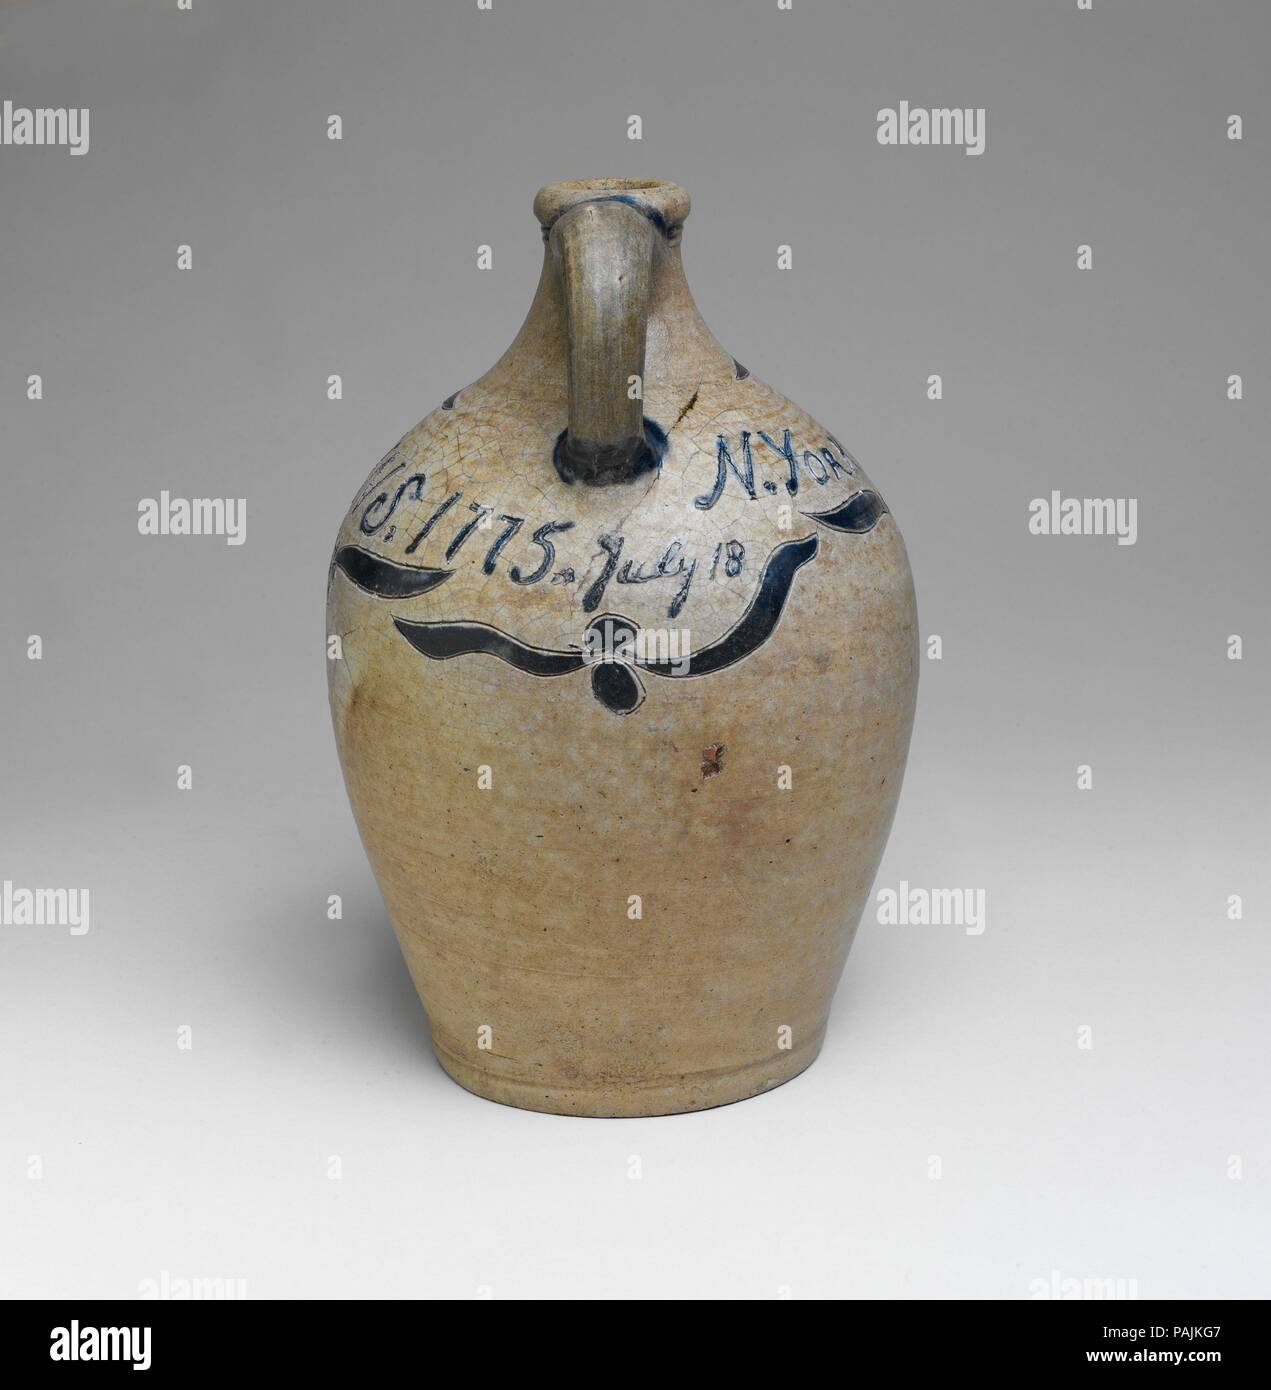 Jug. Culture: American. Dimensions: H. 10 in. (25.4 cm). Maker: John Crolius (1733-1812). Date: 1775.  This jug was probably made by John Crolius, whose family worked in New York City in an area known as Pot Baker's Hill, just north of what is now City Hall Park. He and his brother, William, were among the area's first potters. Their father had emigrated from Germany and founded a pottery, which the family ran until the mid-nineteenth century. The jug is signed and dated, which is rare in eighteenth-century American stoneware. Museum: Metropolitan Museum of Art, New York, USA. Stock Photo